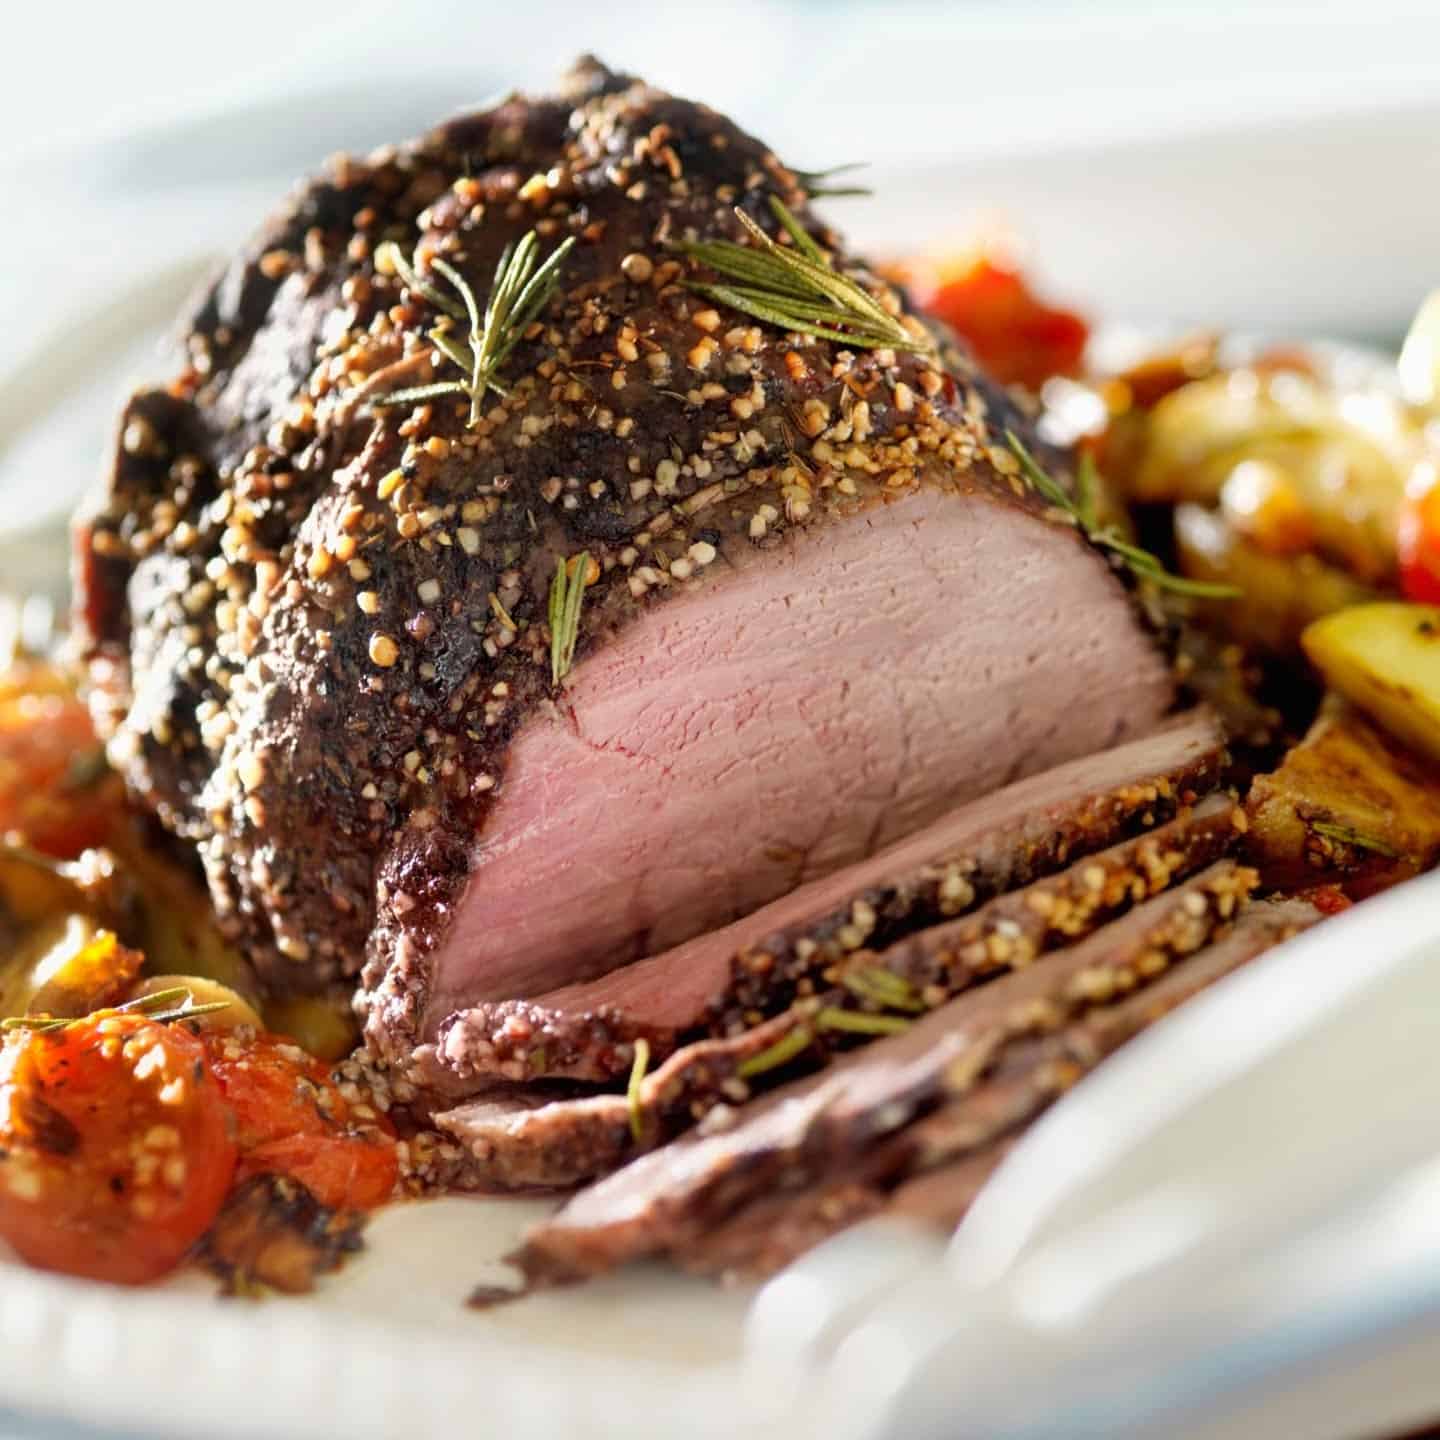 Eye of round roasts are commonly found in select, choice and sometimes prime.